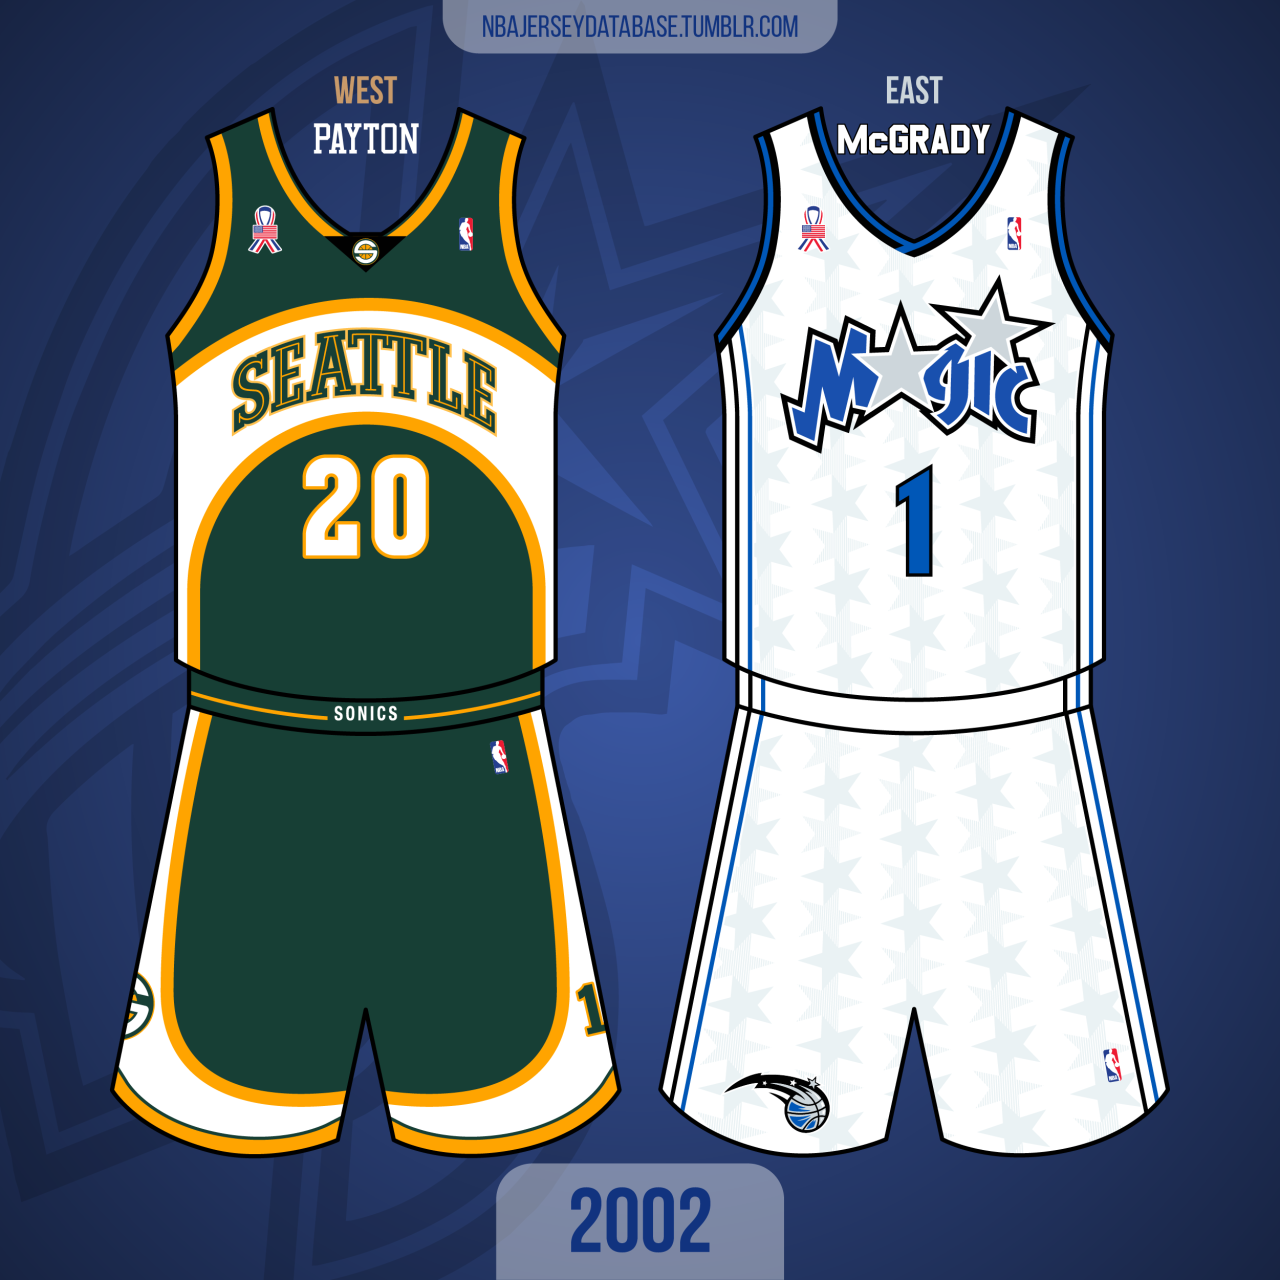 NBA Jersey Database, 1963 NBA All-Star GameLos Angeles Memorial Sports